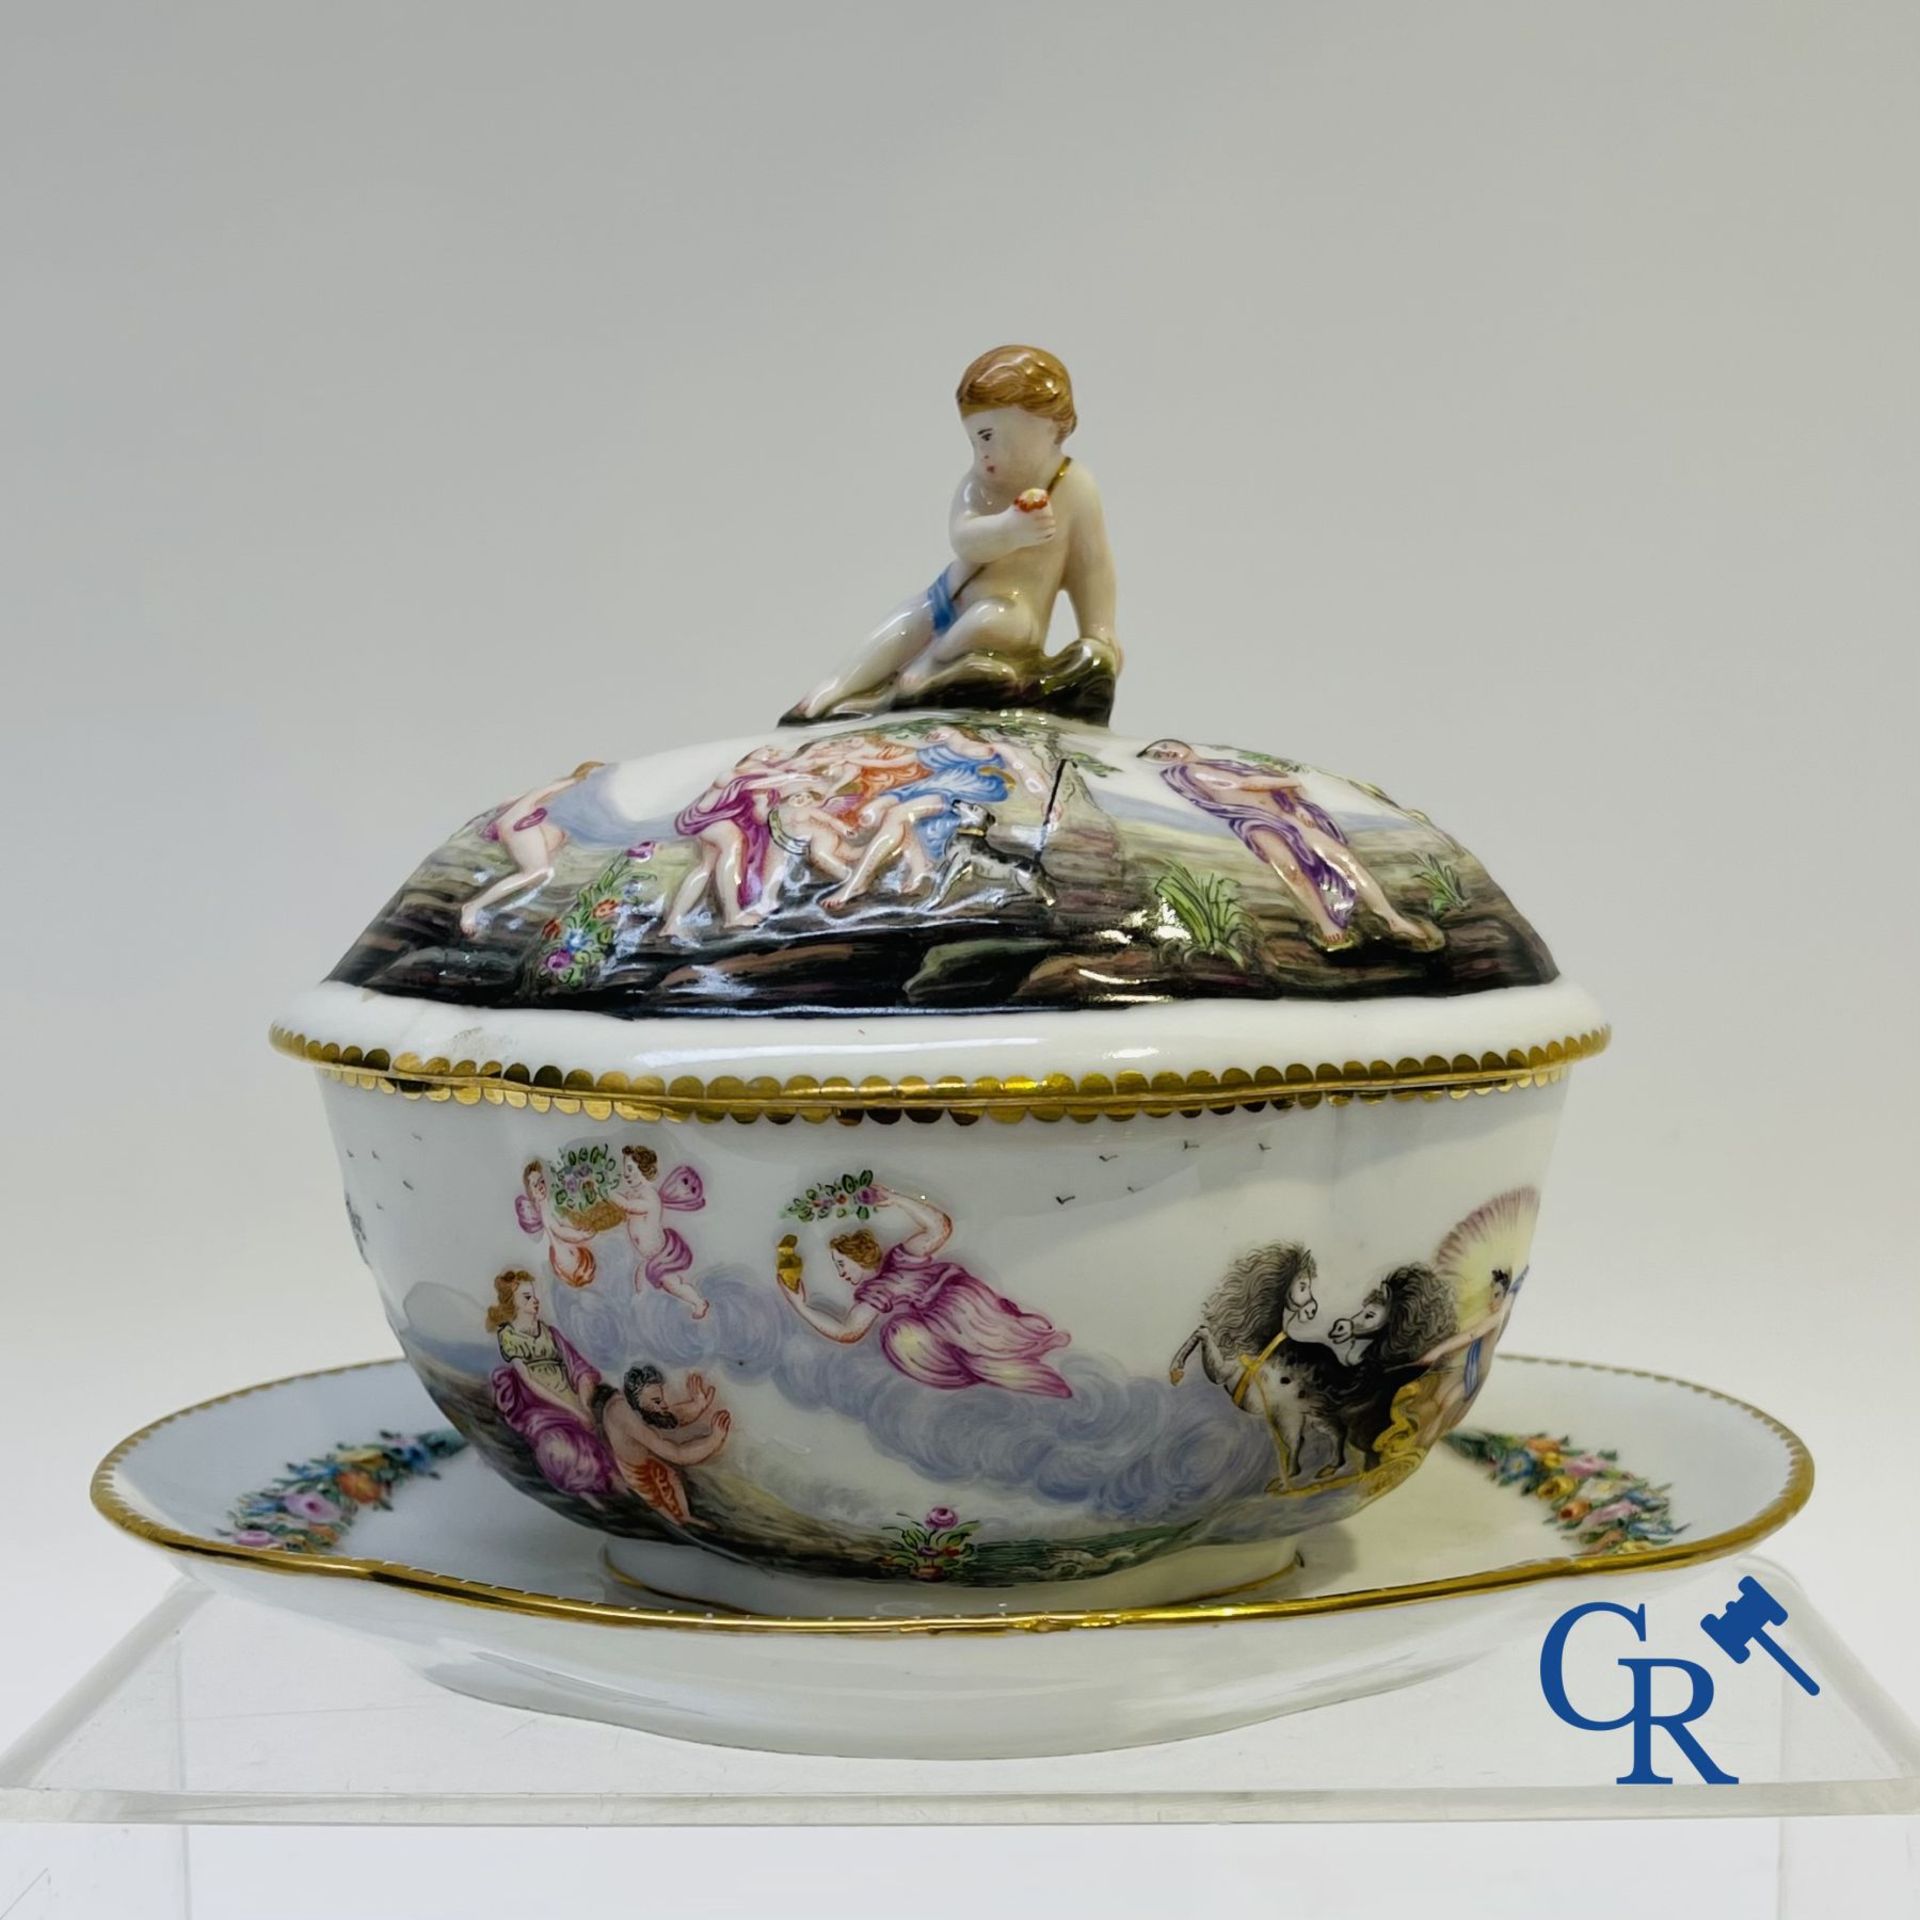 Porcelain: 2 pieces of fine porcelain with mythological scenes. 19th century. - Image 3 of 12